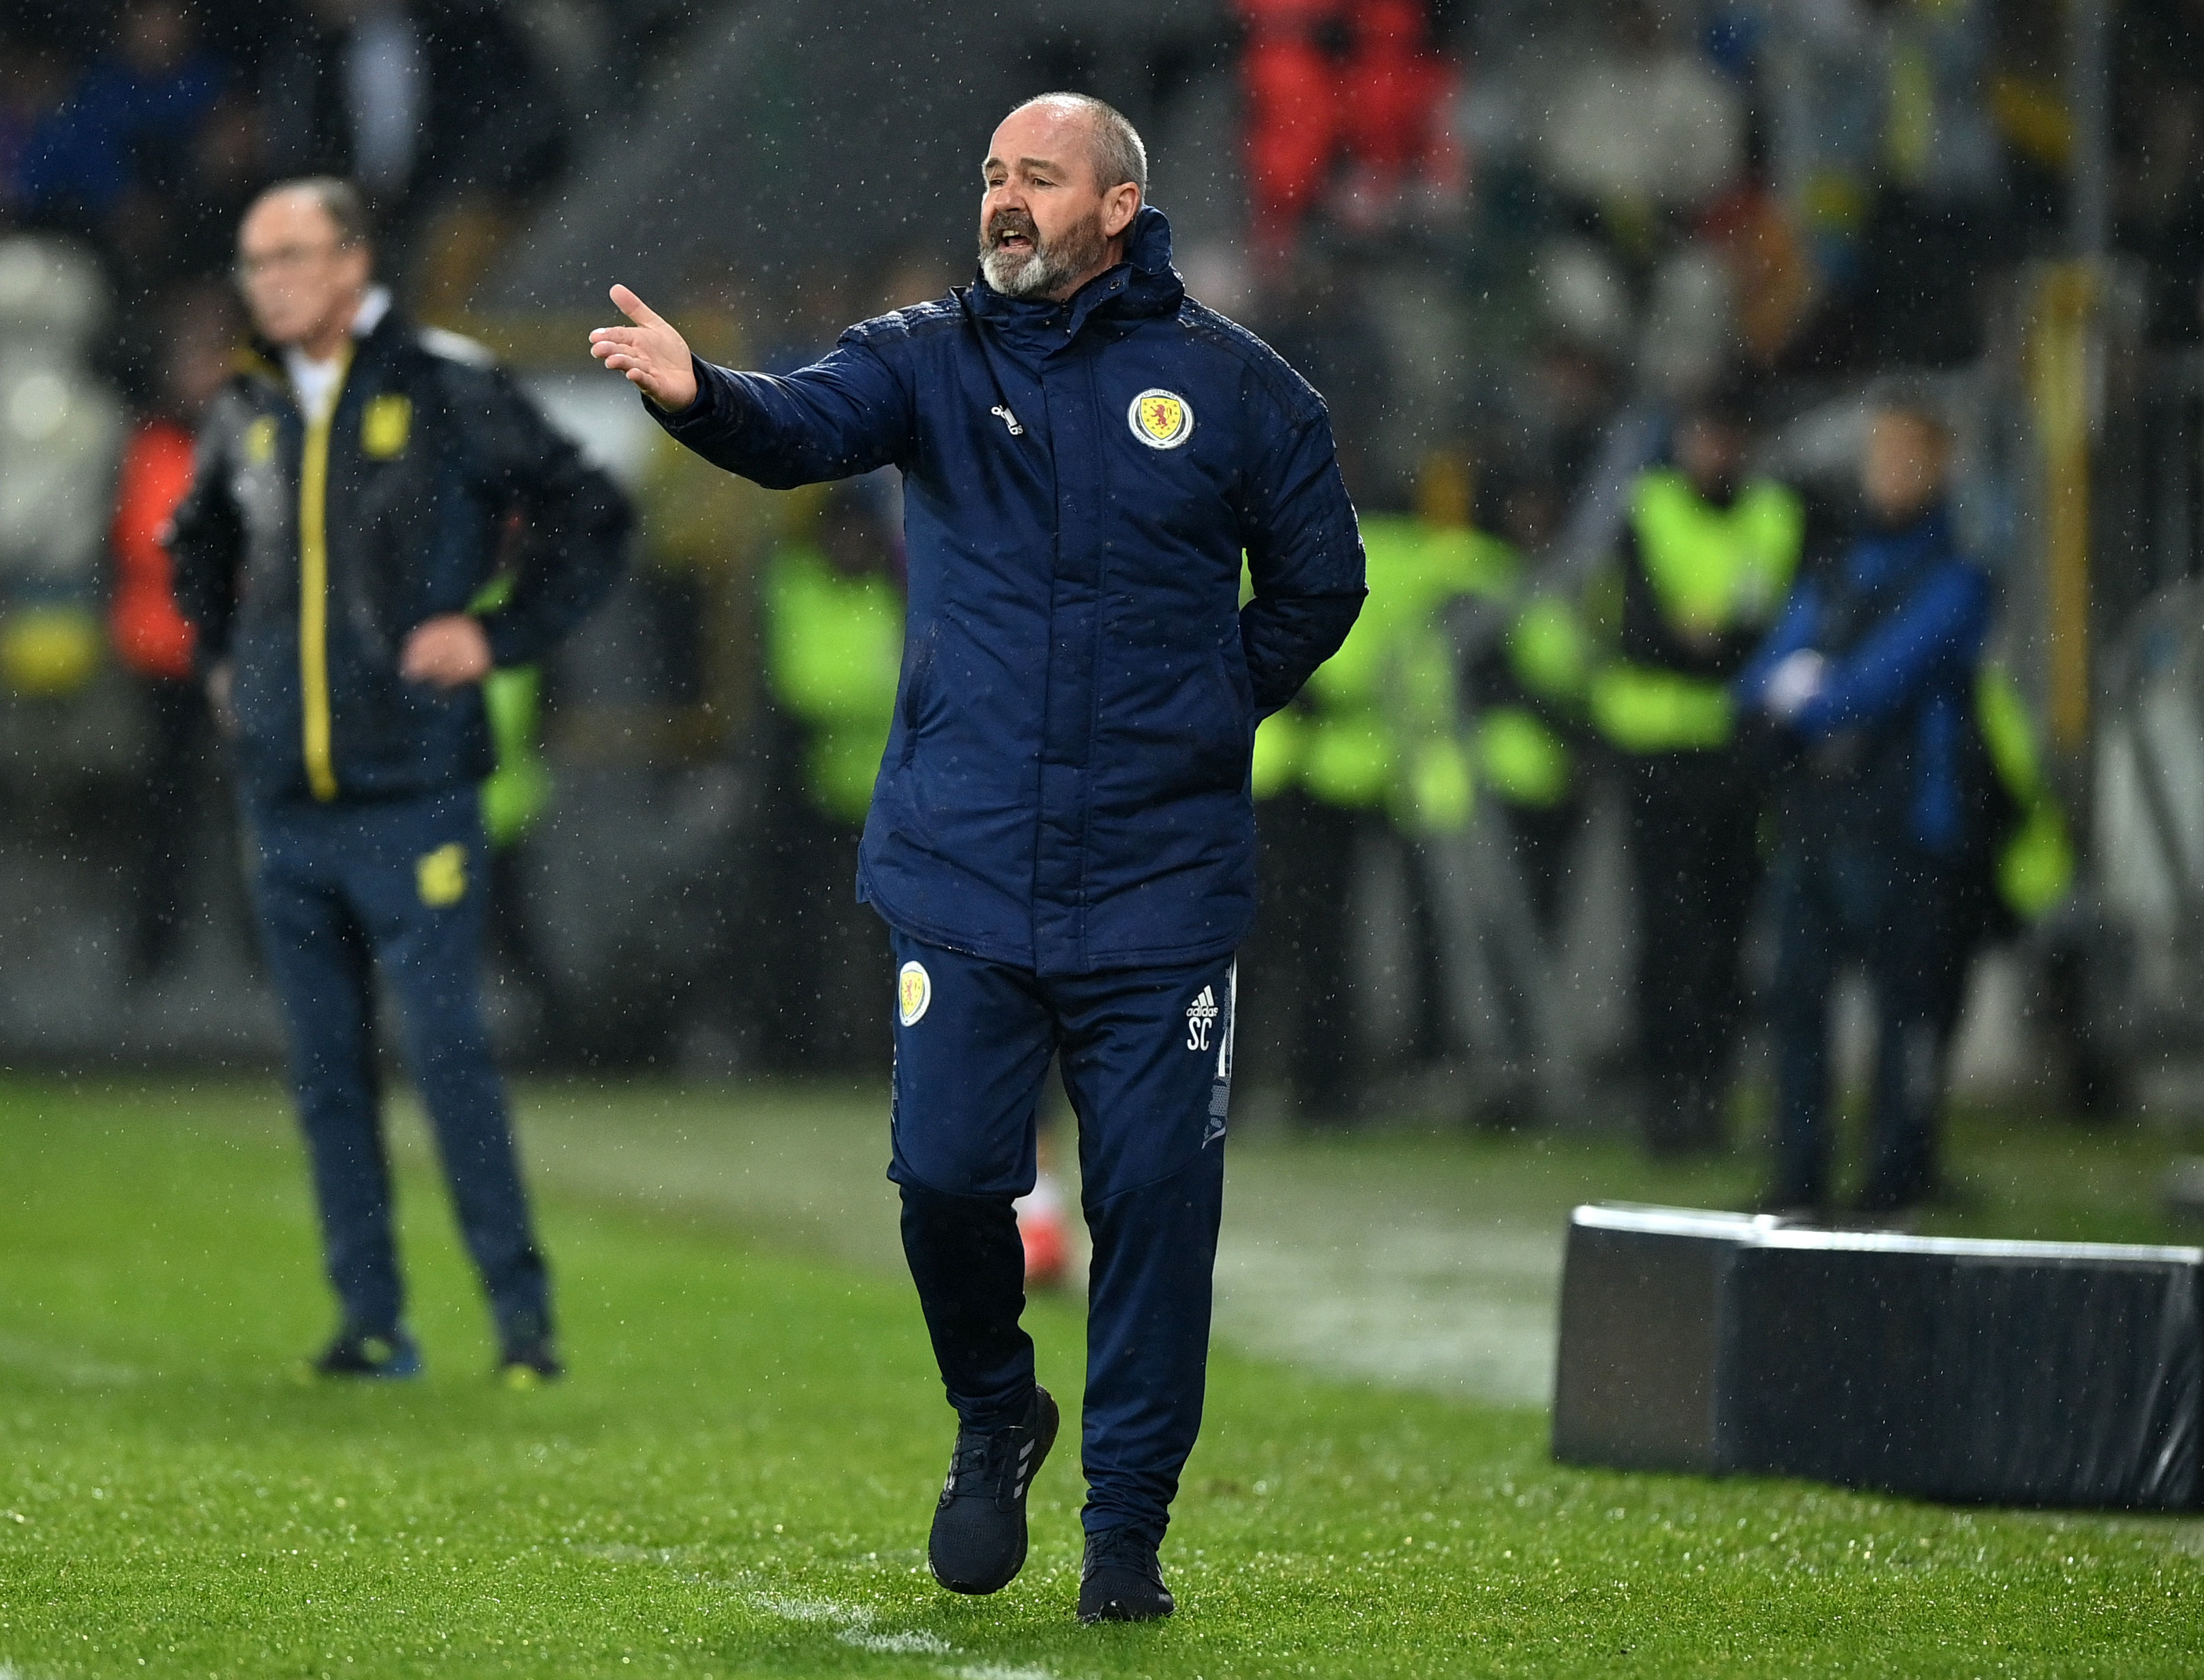 Wanted to show people that what happened in summer wasn't us, reveals Steve Clarke